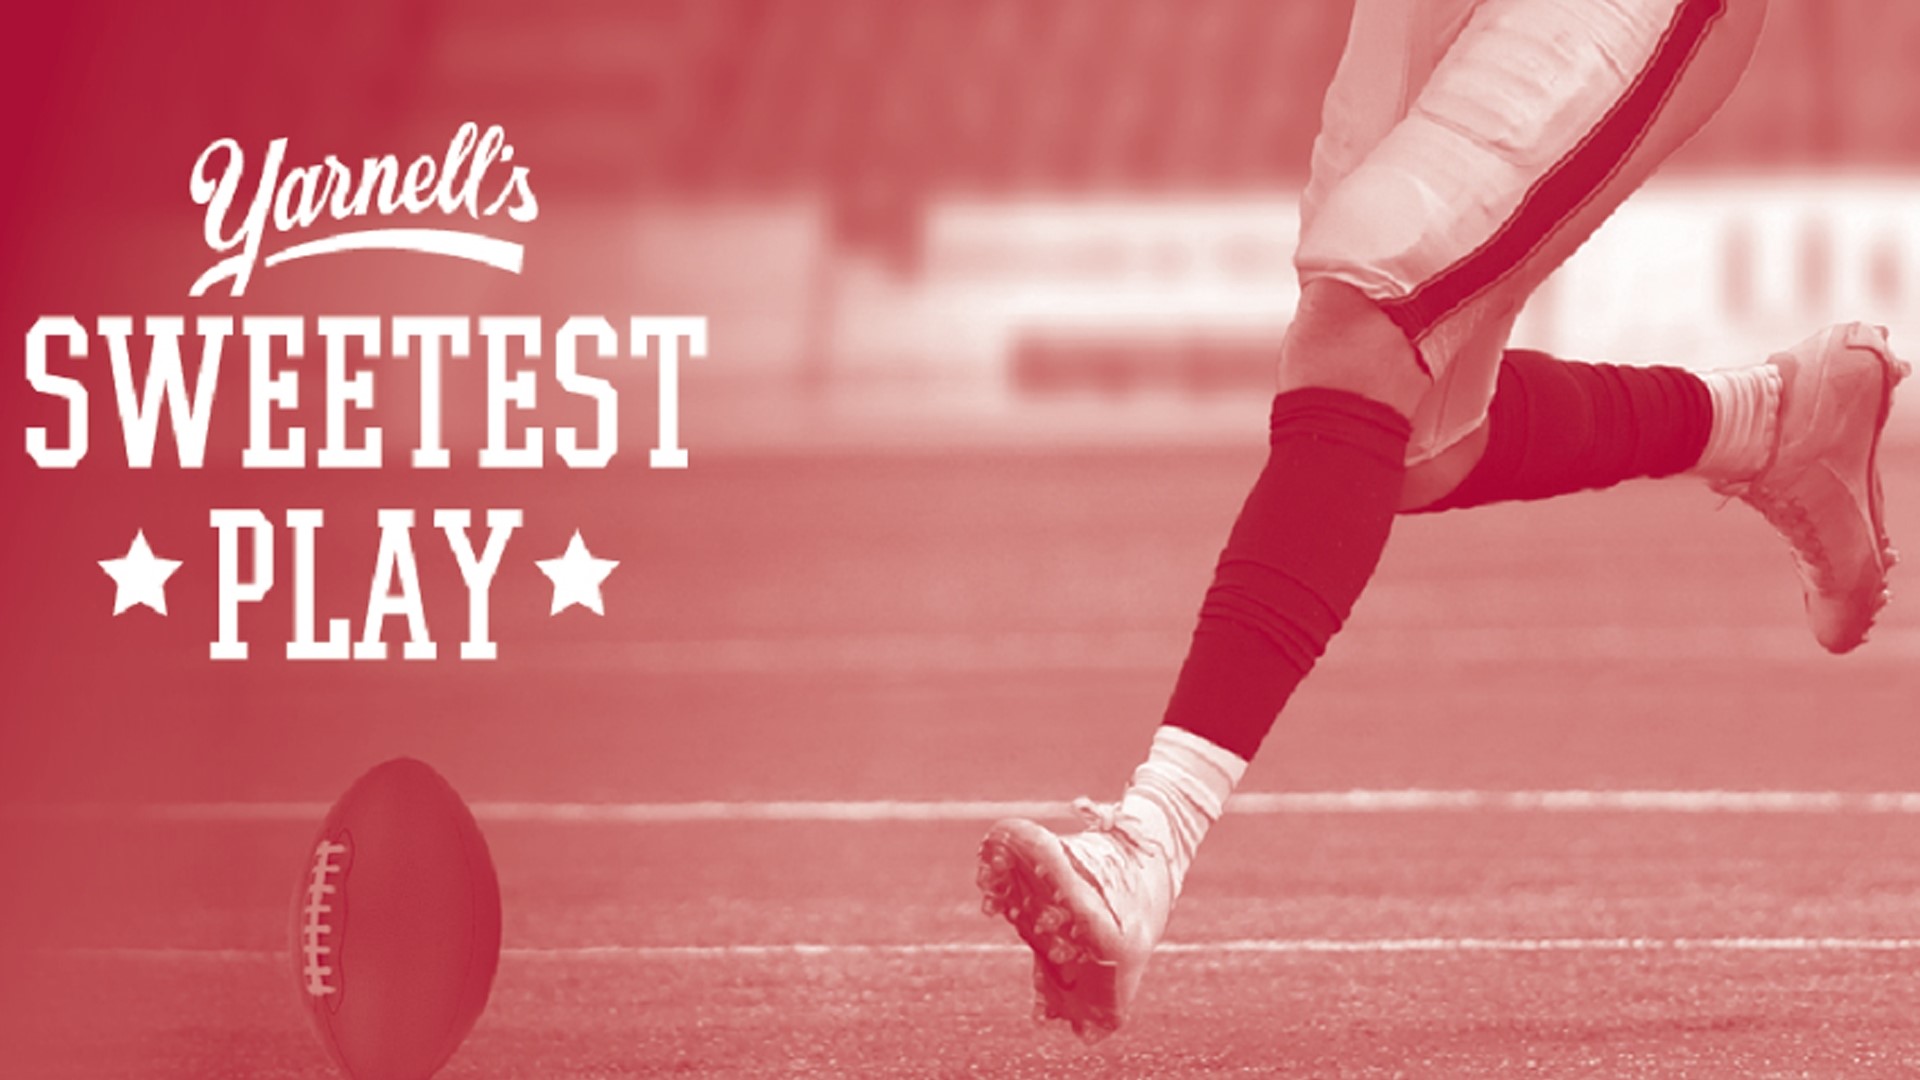 It's now time to vote for Yarnell's Sweetest Play of the Week for week 0! Polls close each Tuesday at 5:00 p.m.